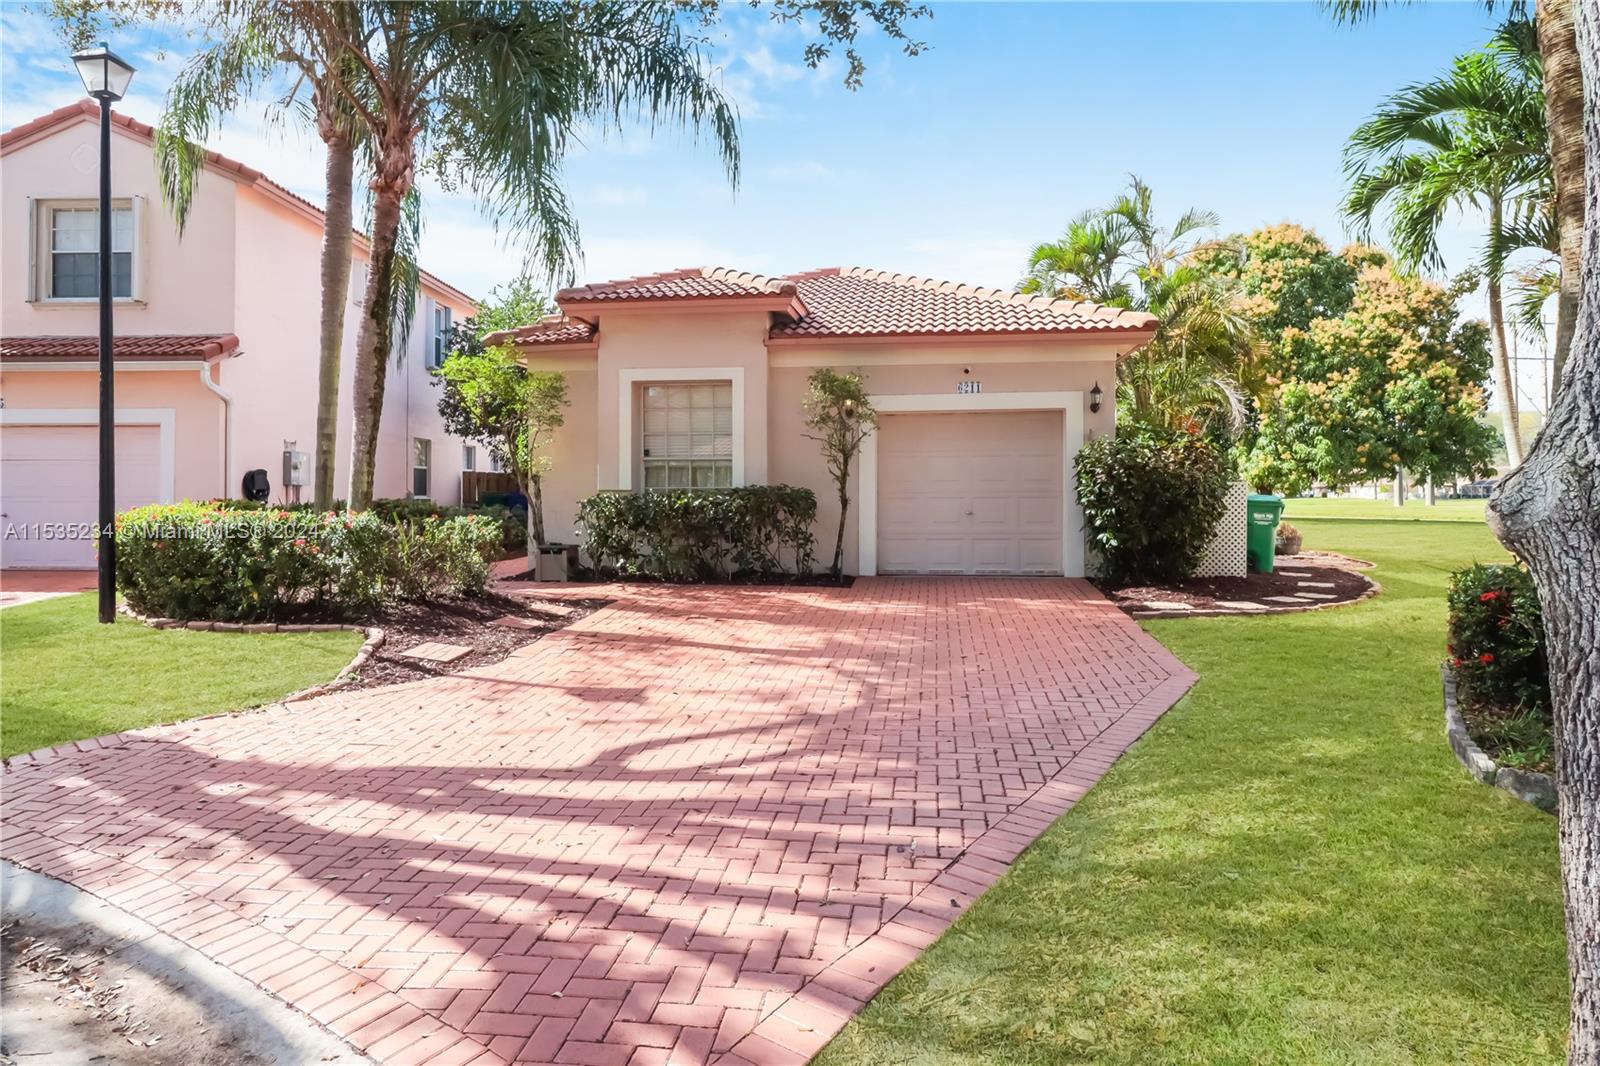 6211 NW 38th Dr, Coral Springs, Florida 33067, 3 Bedrooms Bedrooms, ,2 BathroomsBathrooms,Residential,For Sale,6211 NW 38th Dr,A11535234